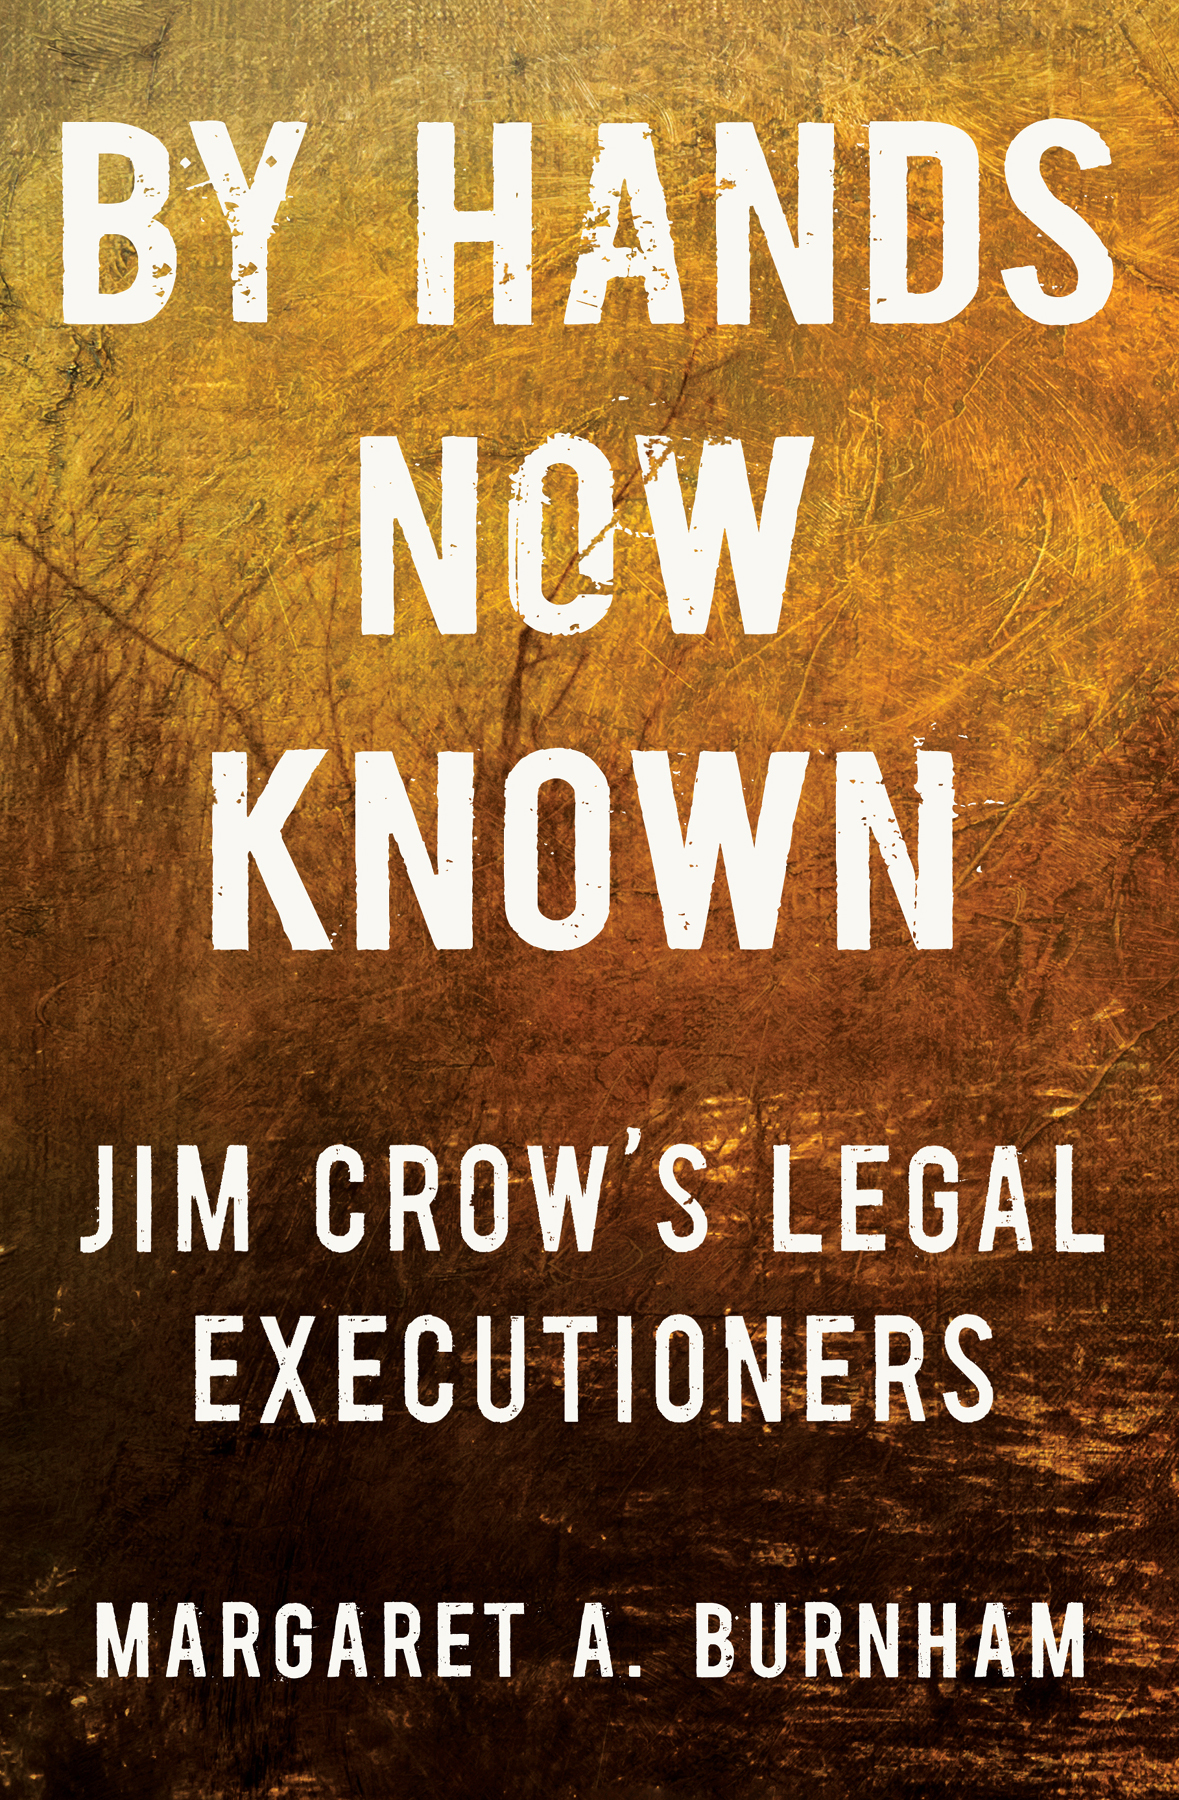 BY HANDS NOW KNOWN JIM CROWS LEGAL EXECUTIONERS - photo 1